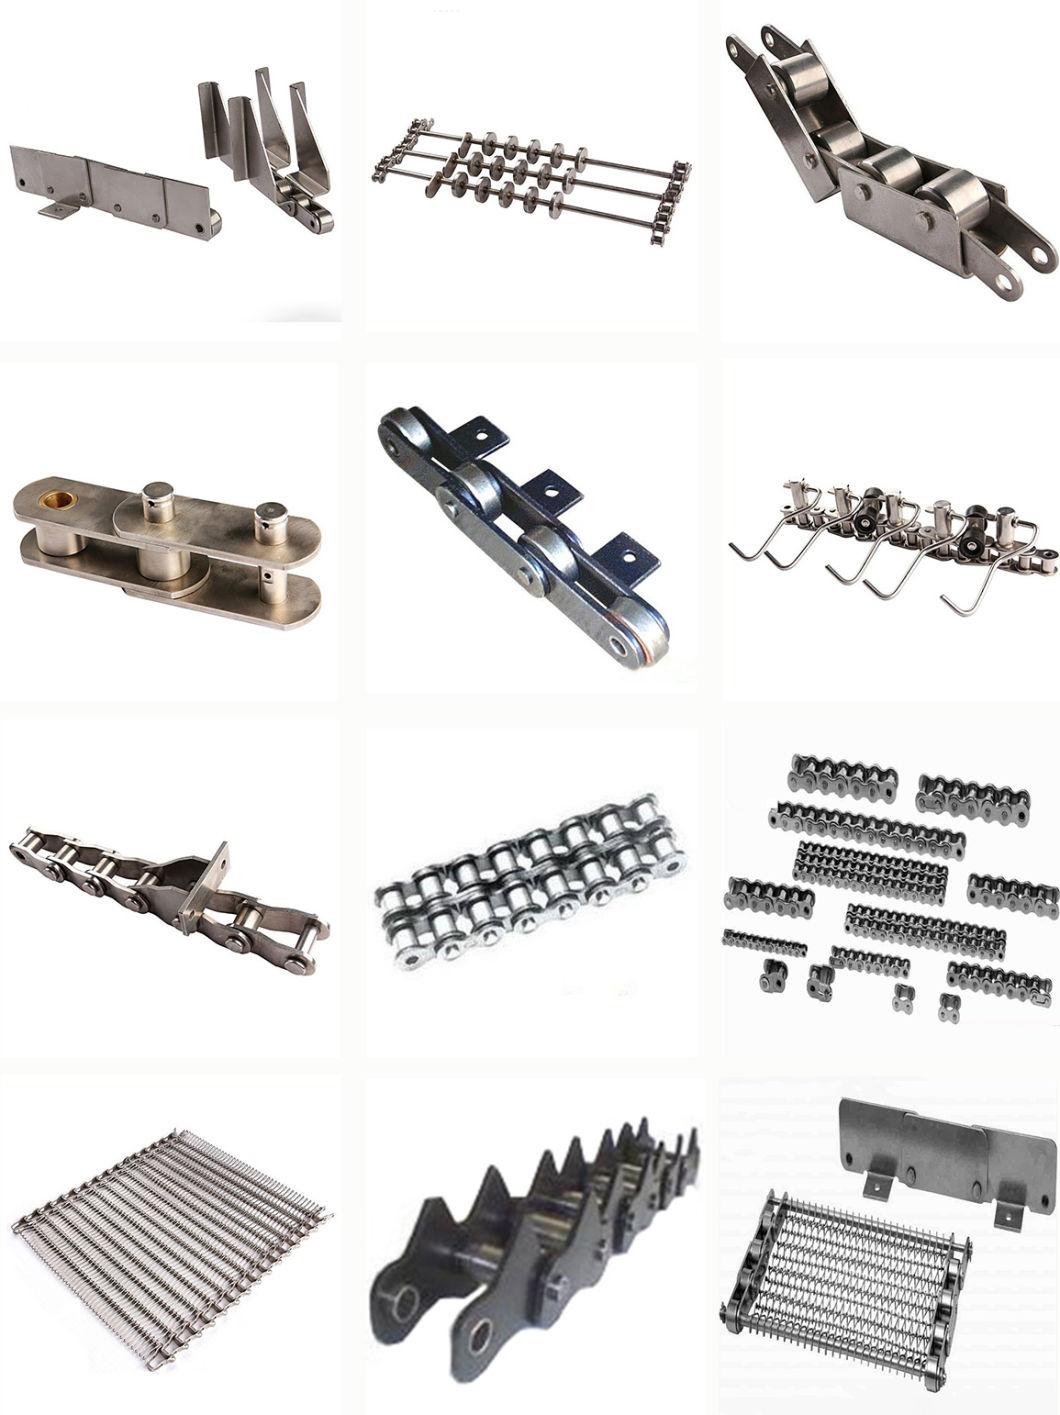 Heat Treatment Carbon Steel Stainless Steel Motorcycle Agricultural Machinery Industrial Plastic Conveyor Chains